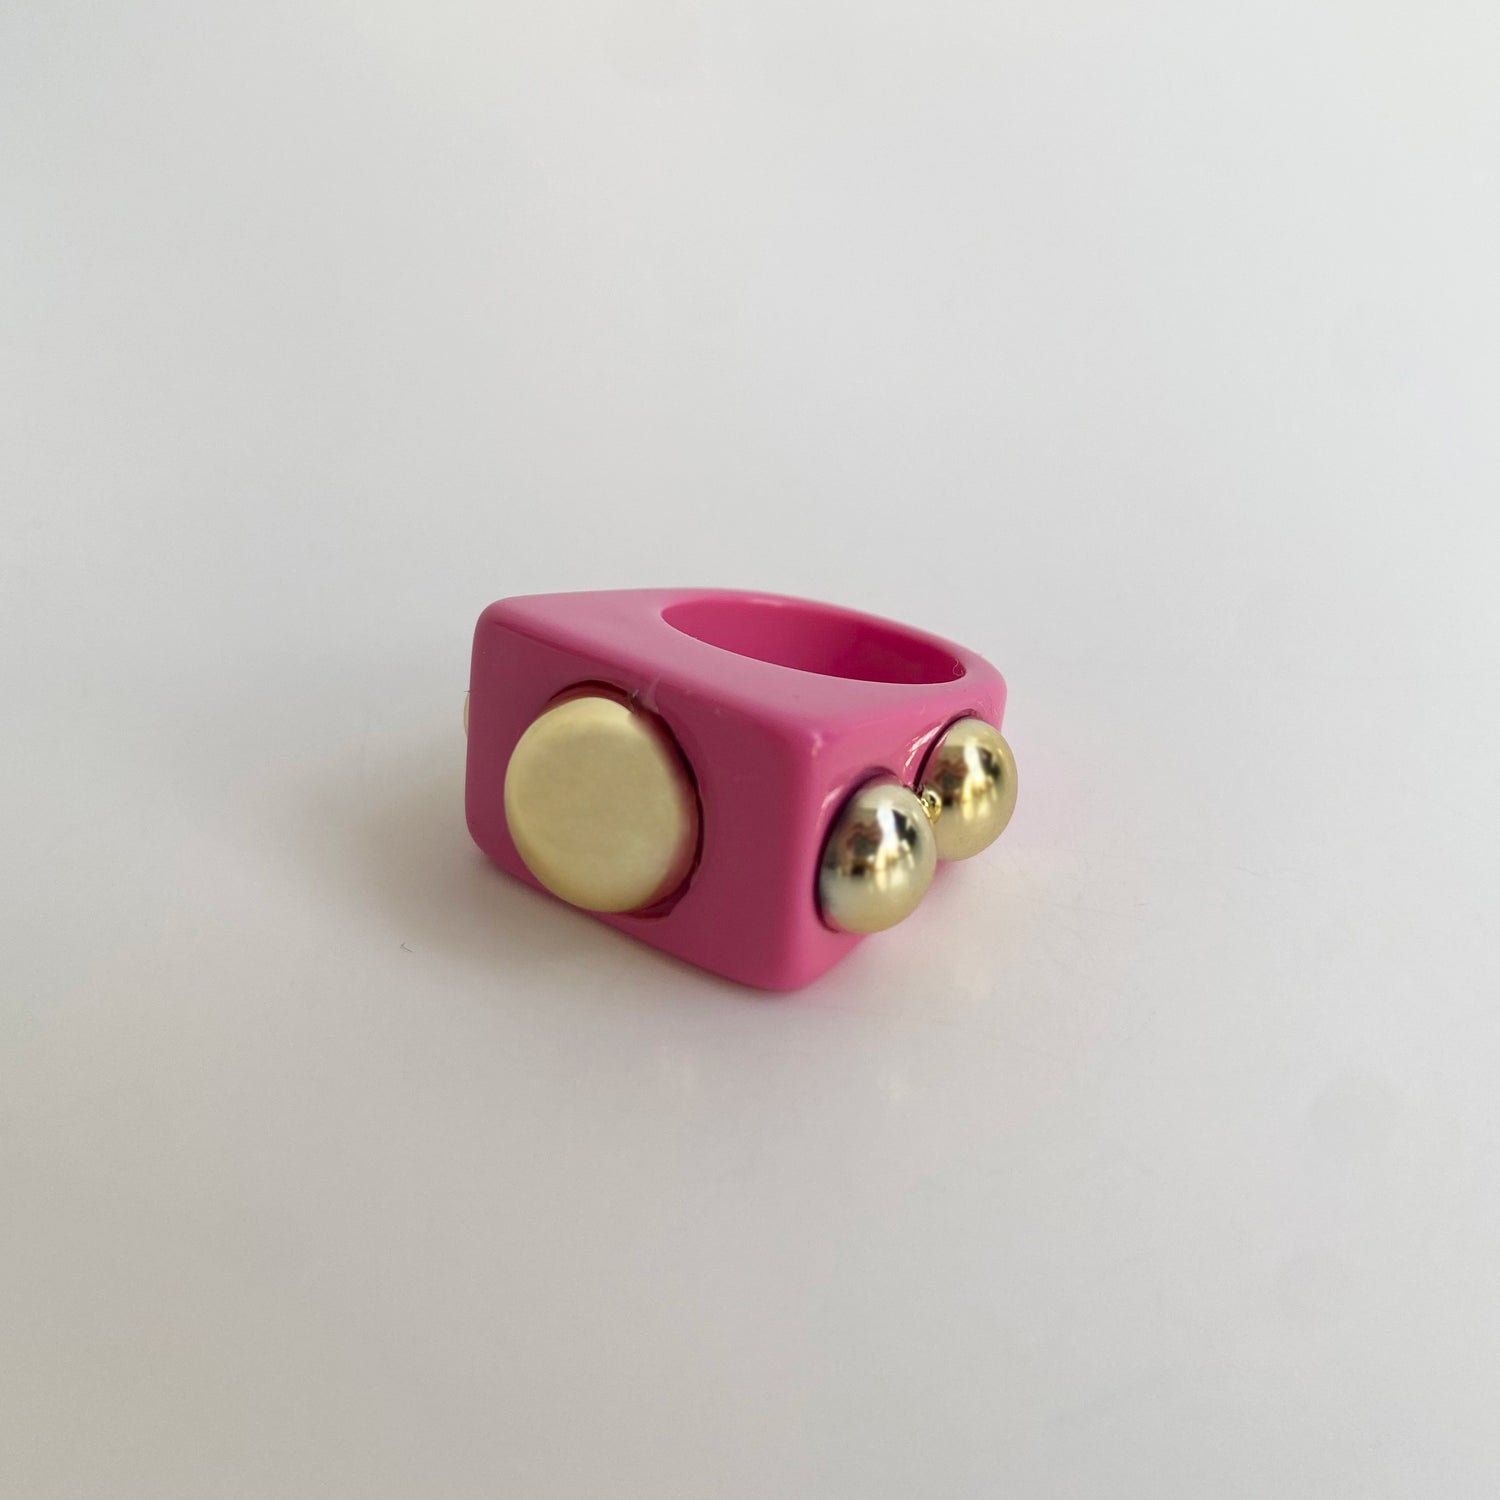 acrylic stud ring in pink